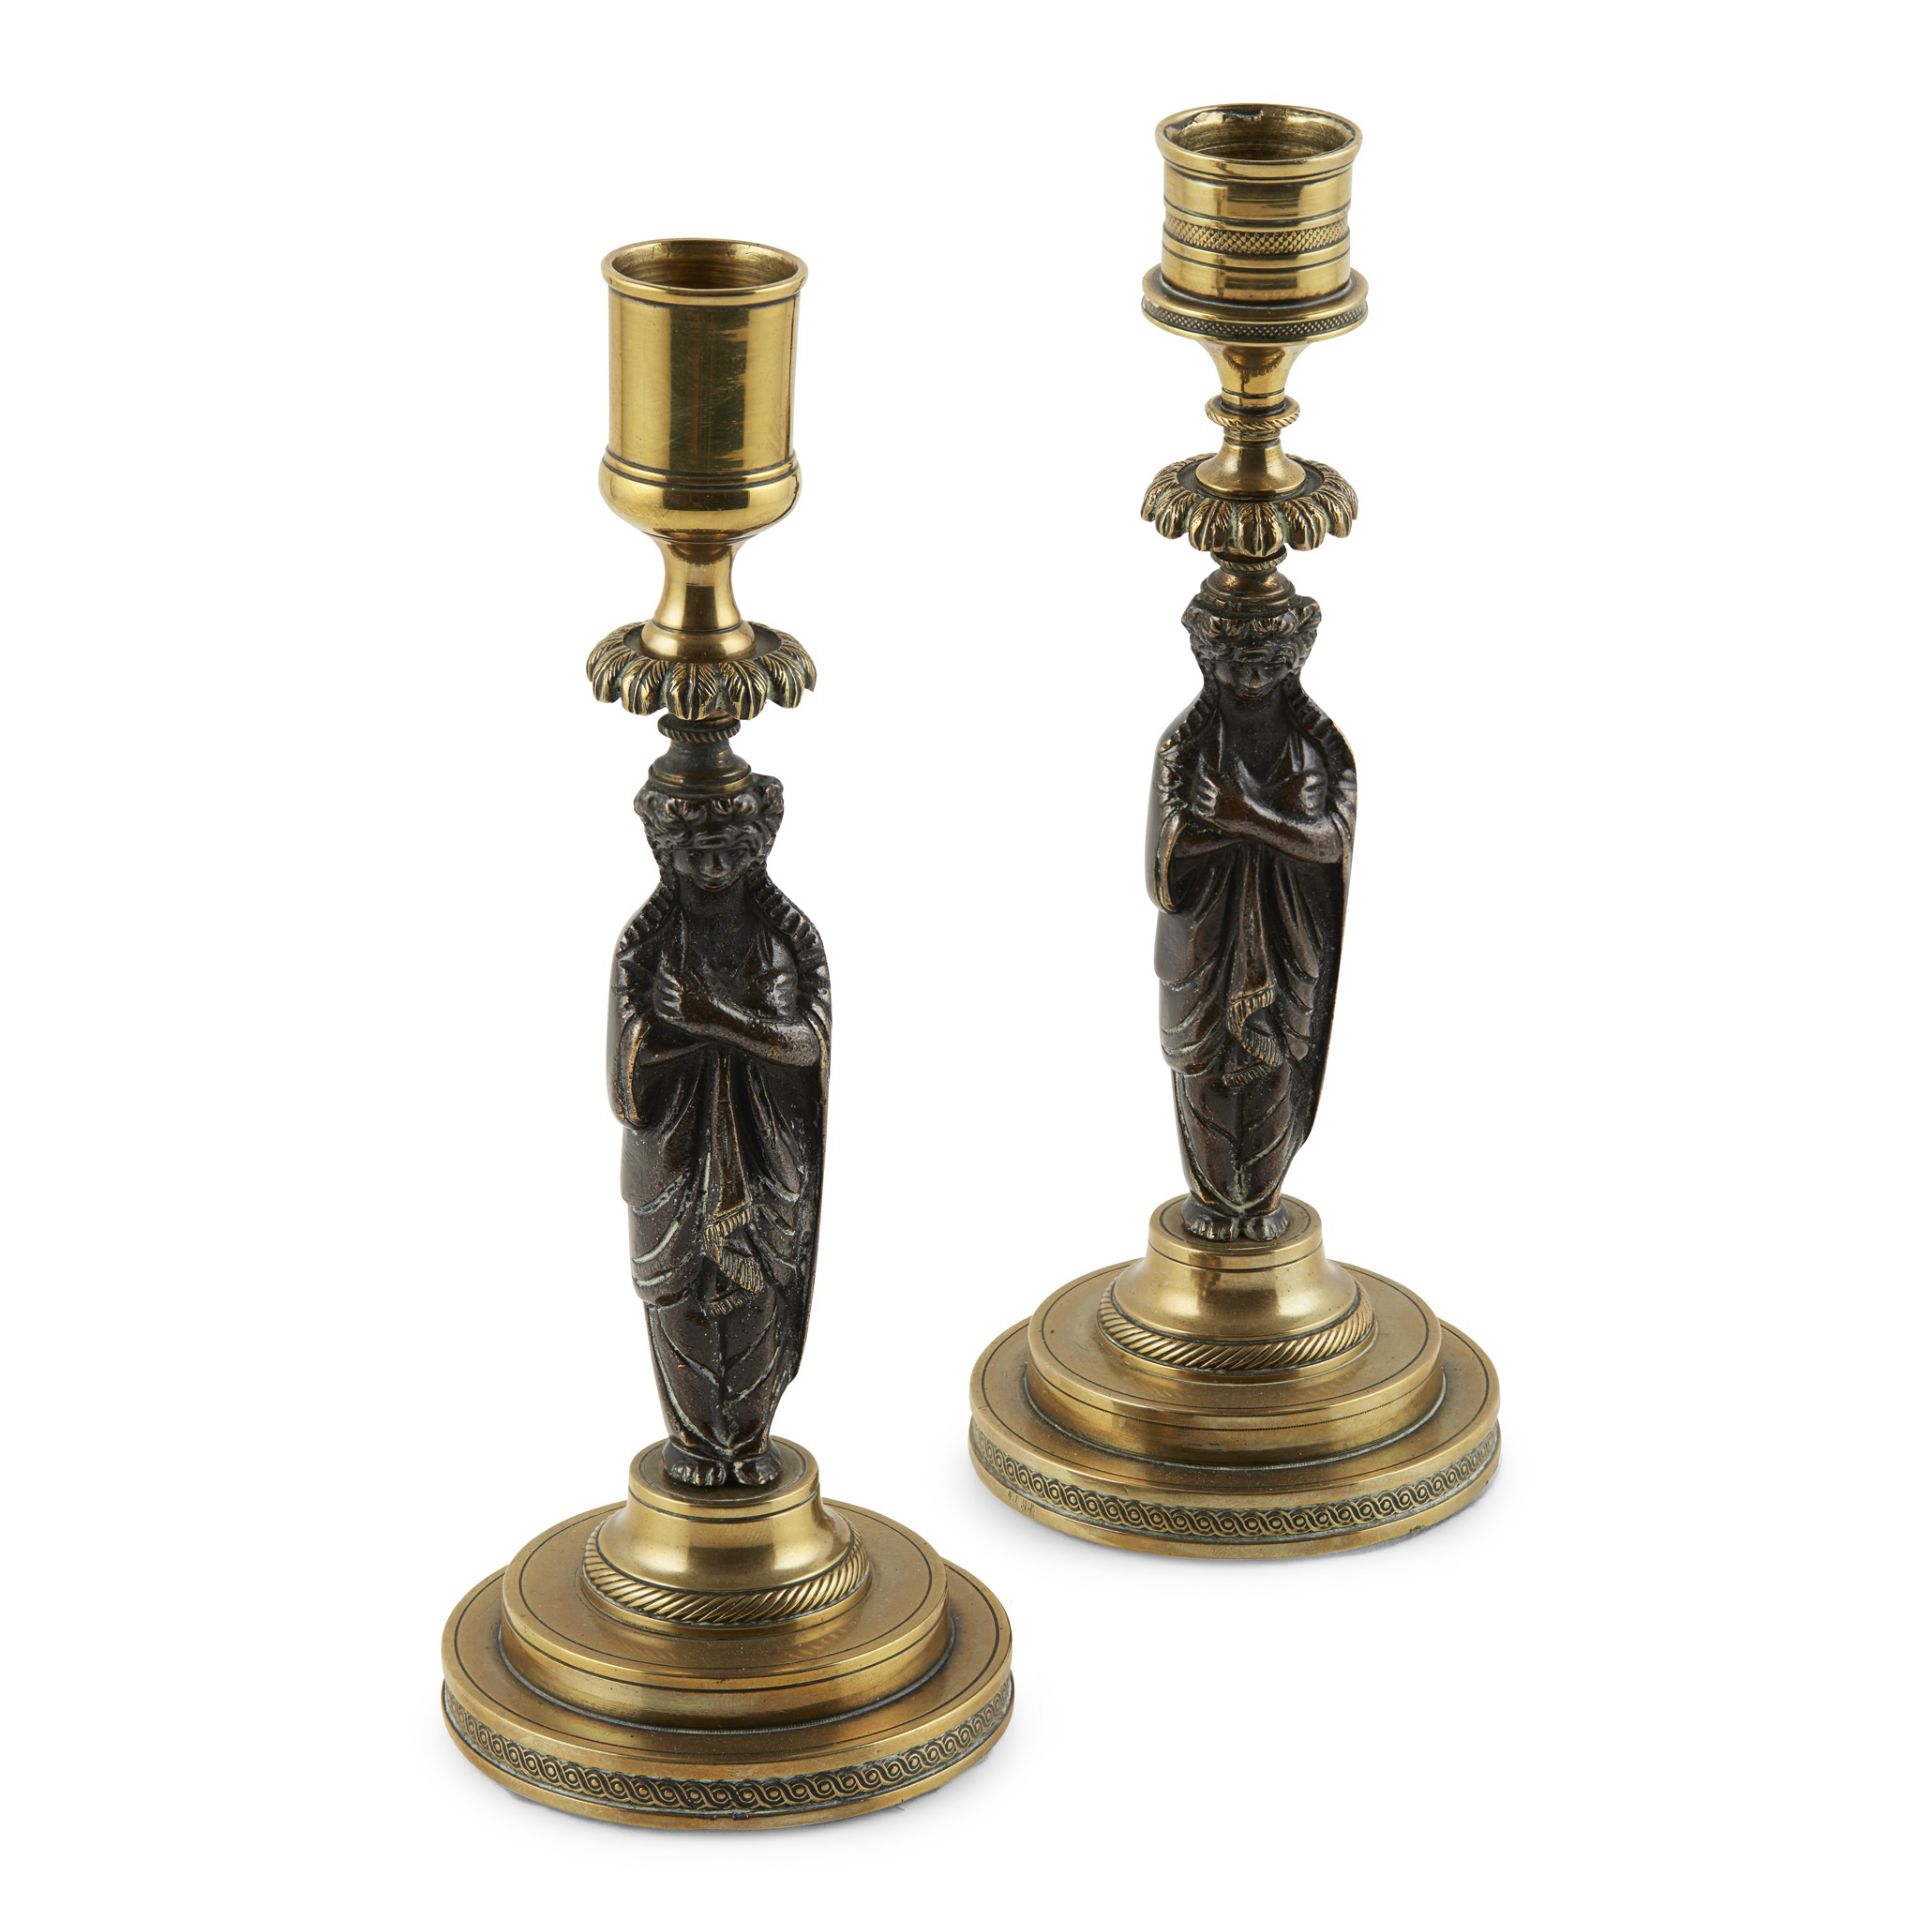 MATCHED PAIR OF FRENCH BRONZE AND BRASS FIGURAL CANDLESTICKS 19TH CENTURY